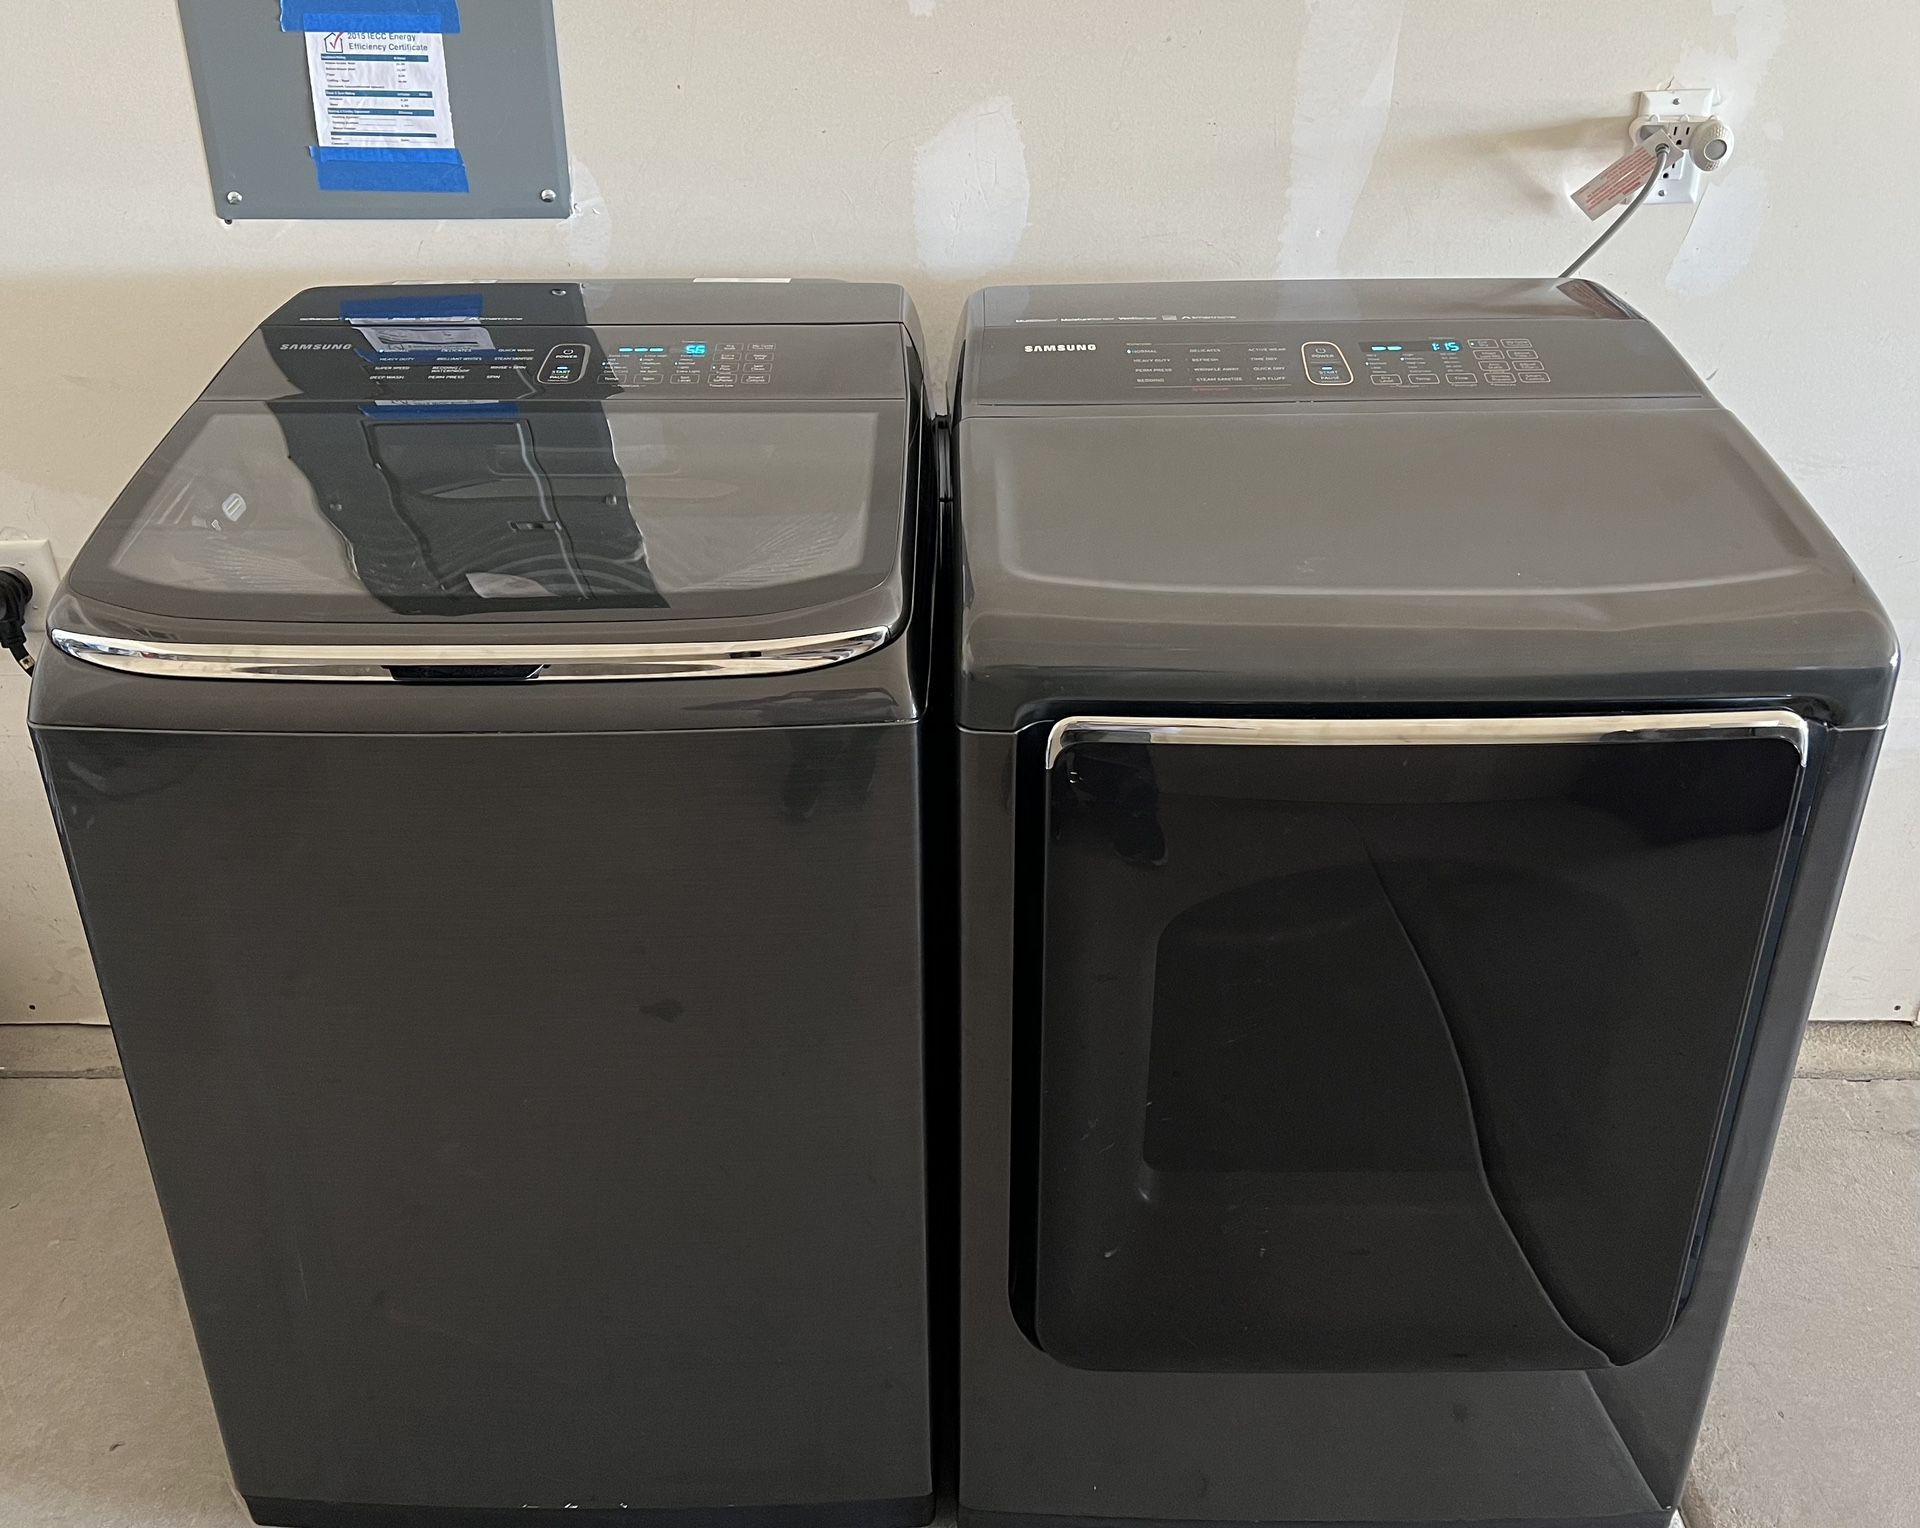 Washer and Dryer (delivery available)